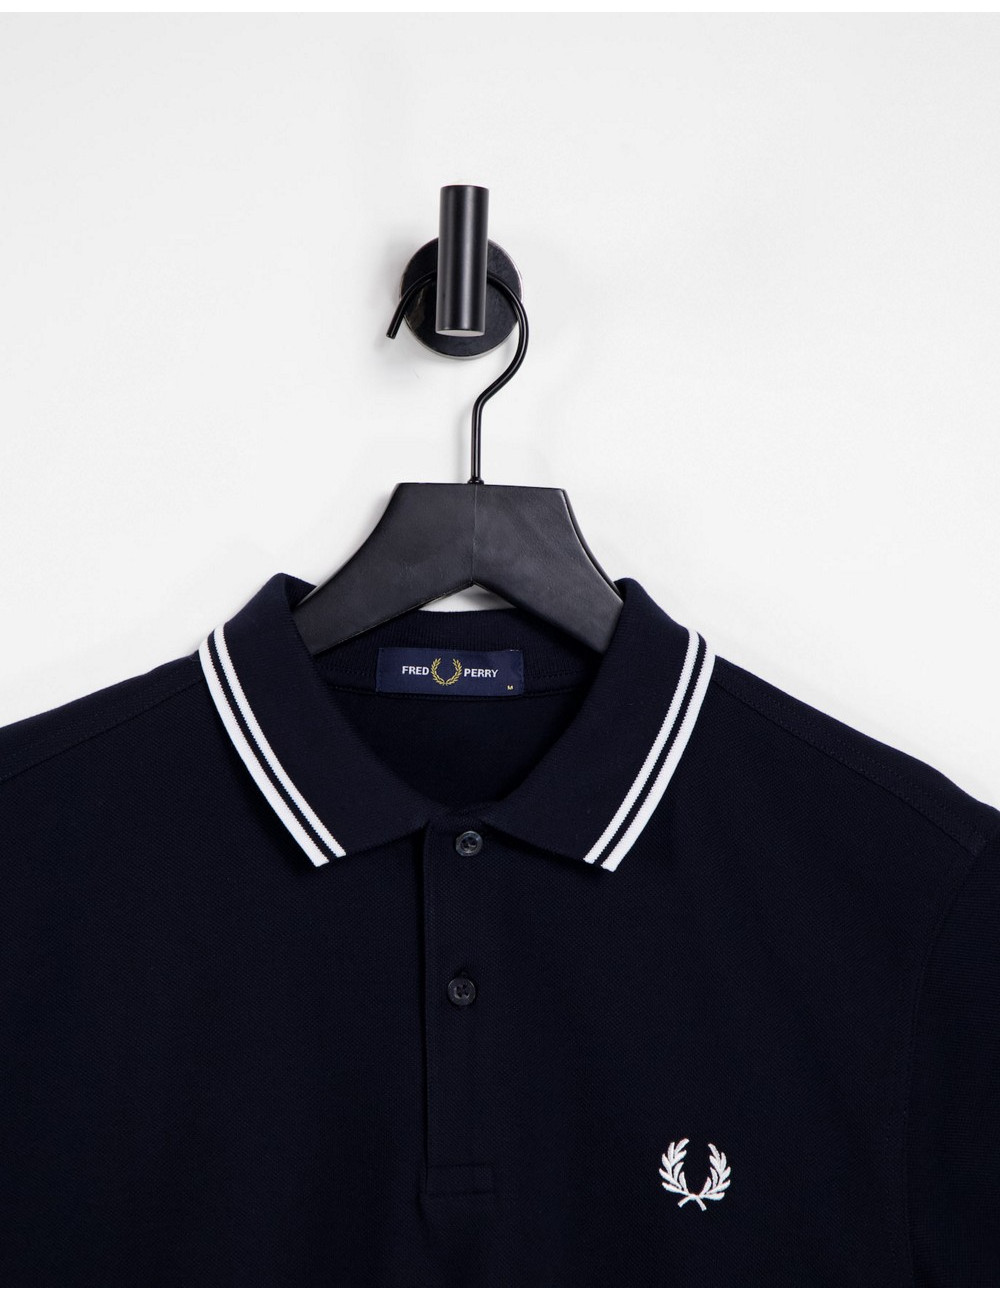 Fred Perry twin tipped logo...